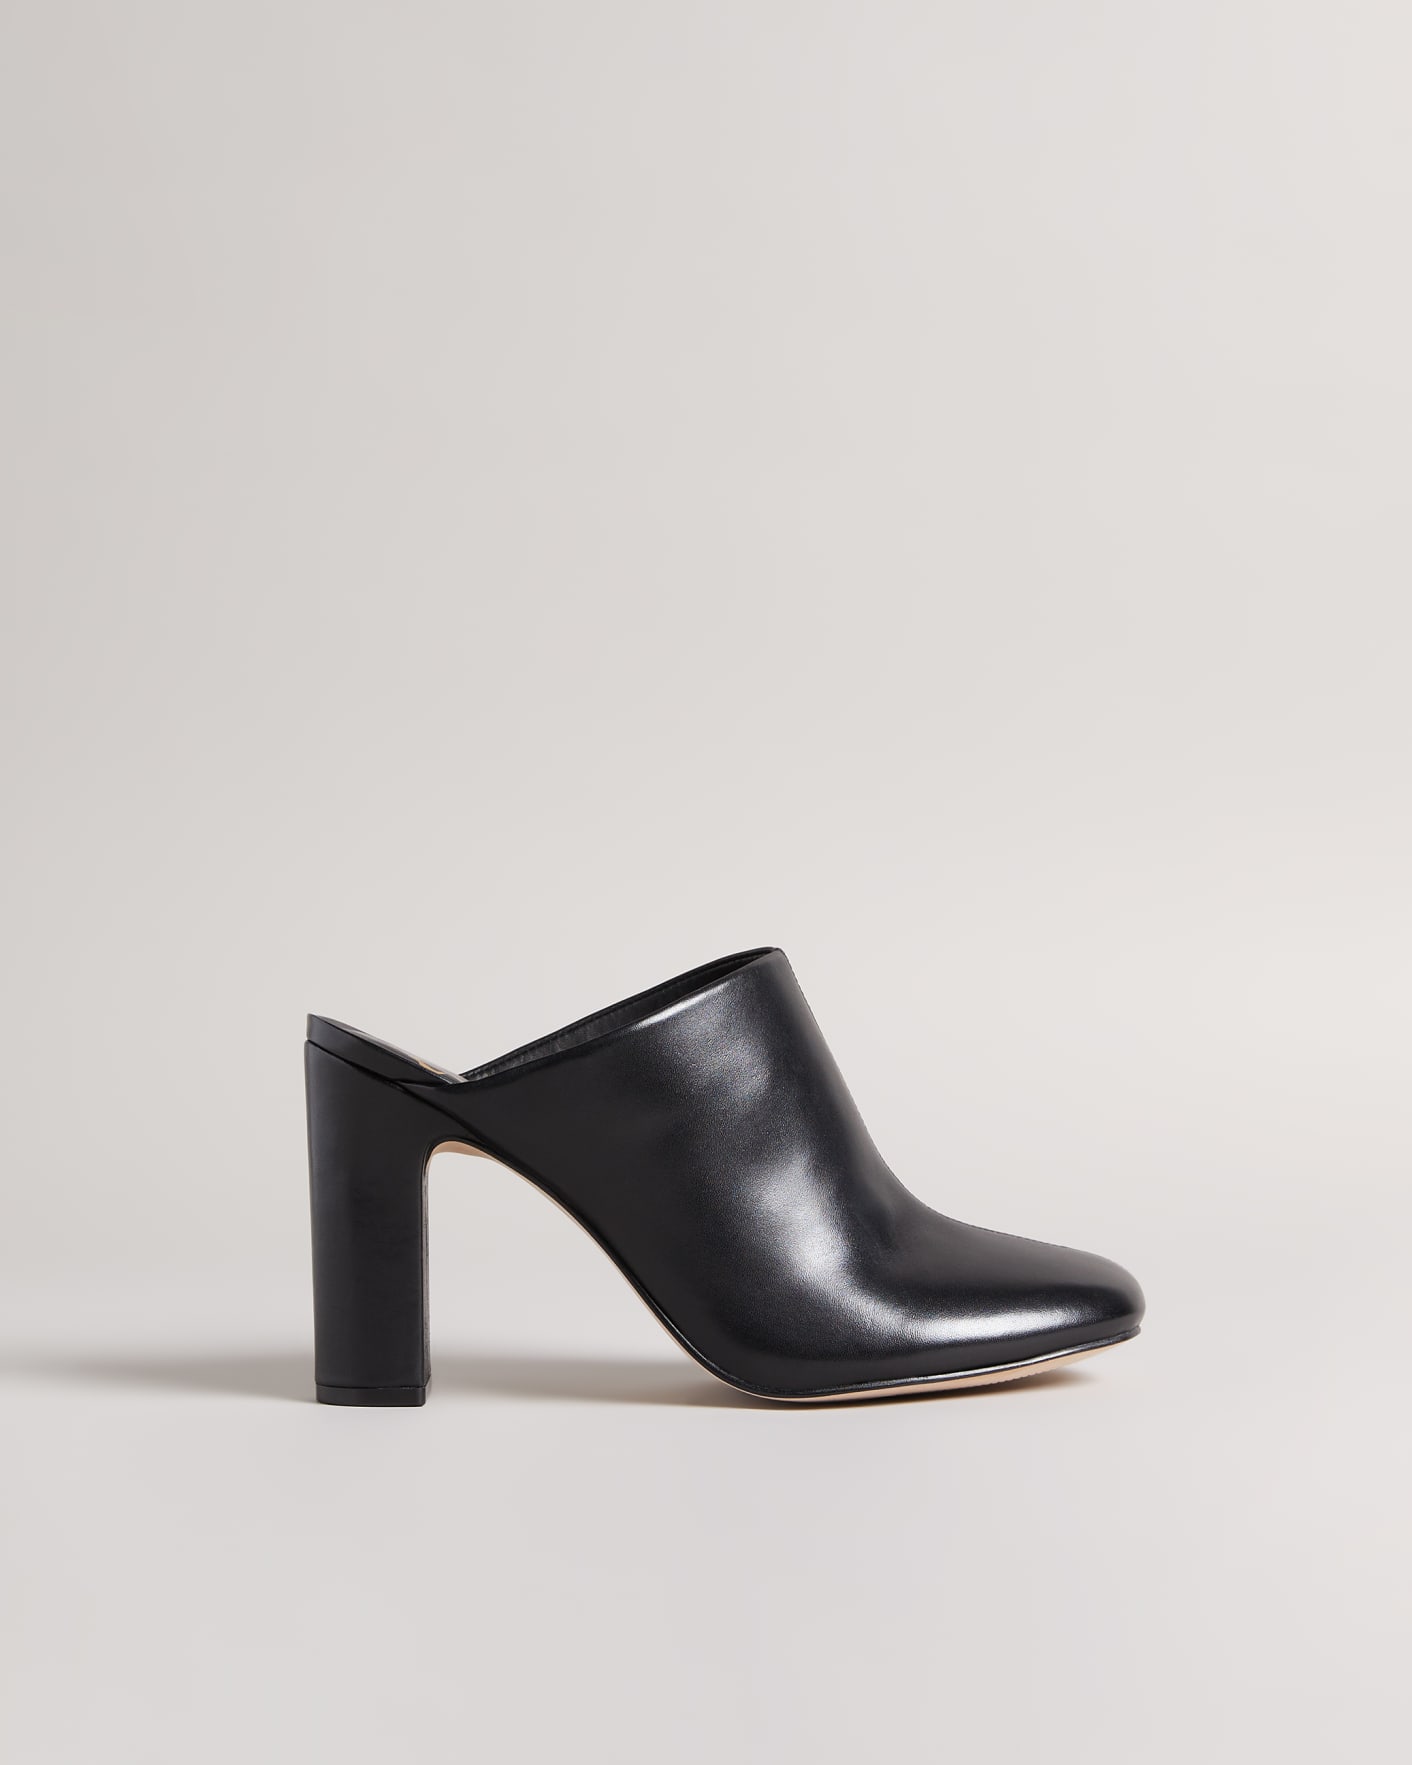 Black Leather Heeled Mule Shoes Ted Baker